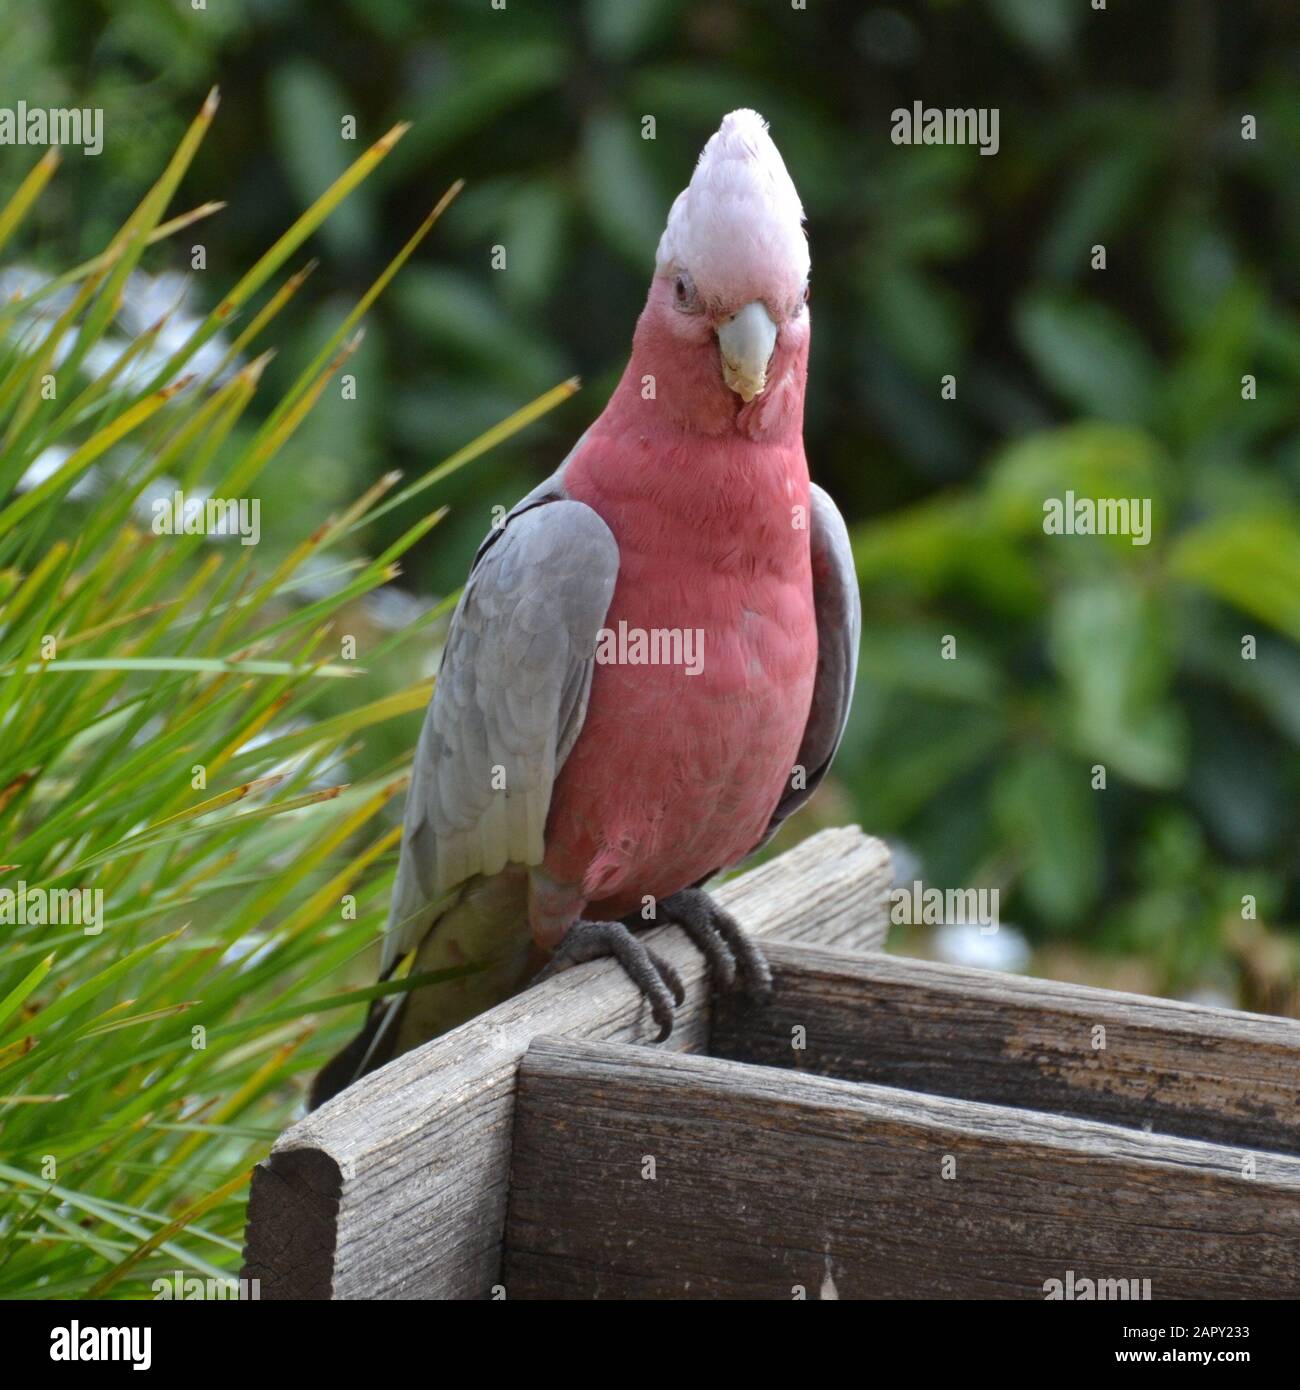 Funny looking wild pink and grey galah parrot perched on a feeding trough Stock Photo